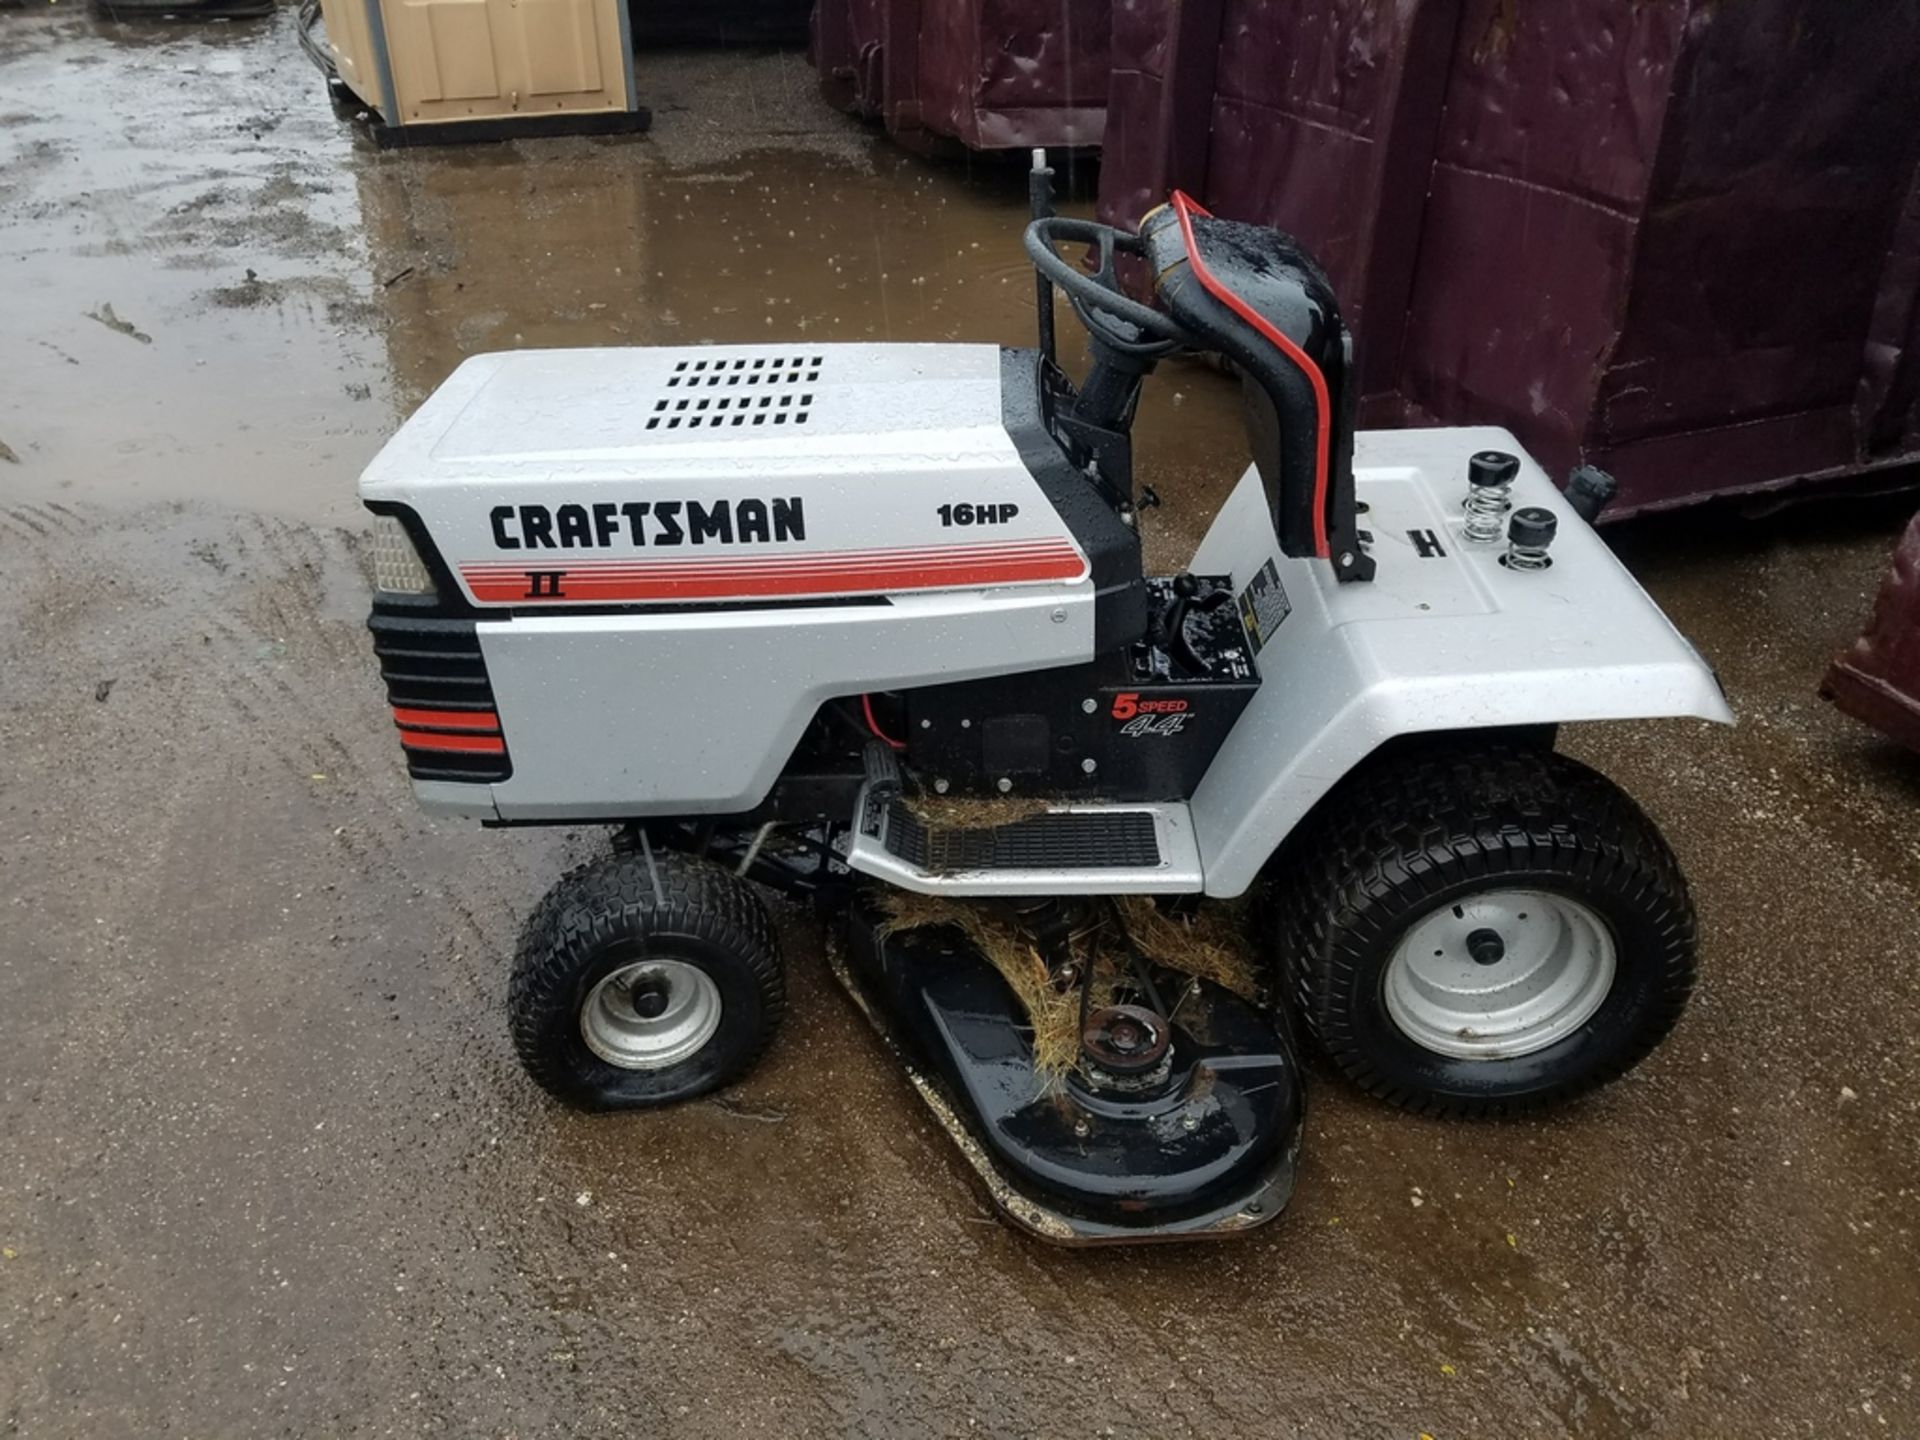 CRAFTSMAN II RIDING LAWN TRACTOR 16HP 5 SPEED 44" DECK